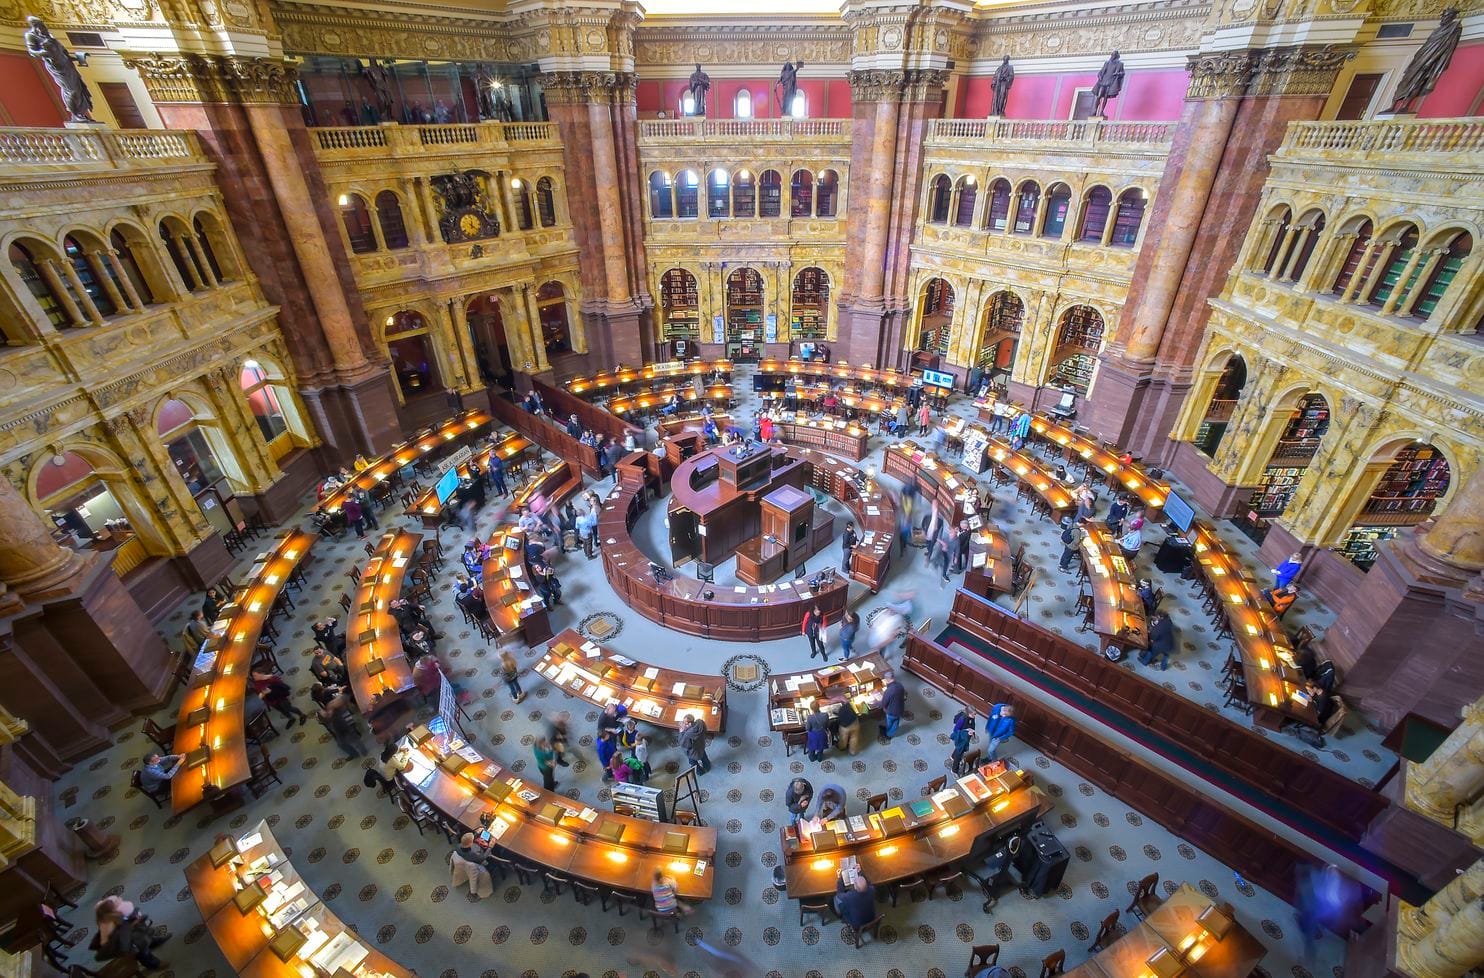 An 3/4 overhead view of the Library of Congress reading room, showing a concentric circles of reading desks and a high dome ceiling